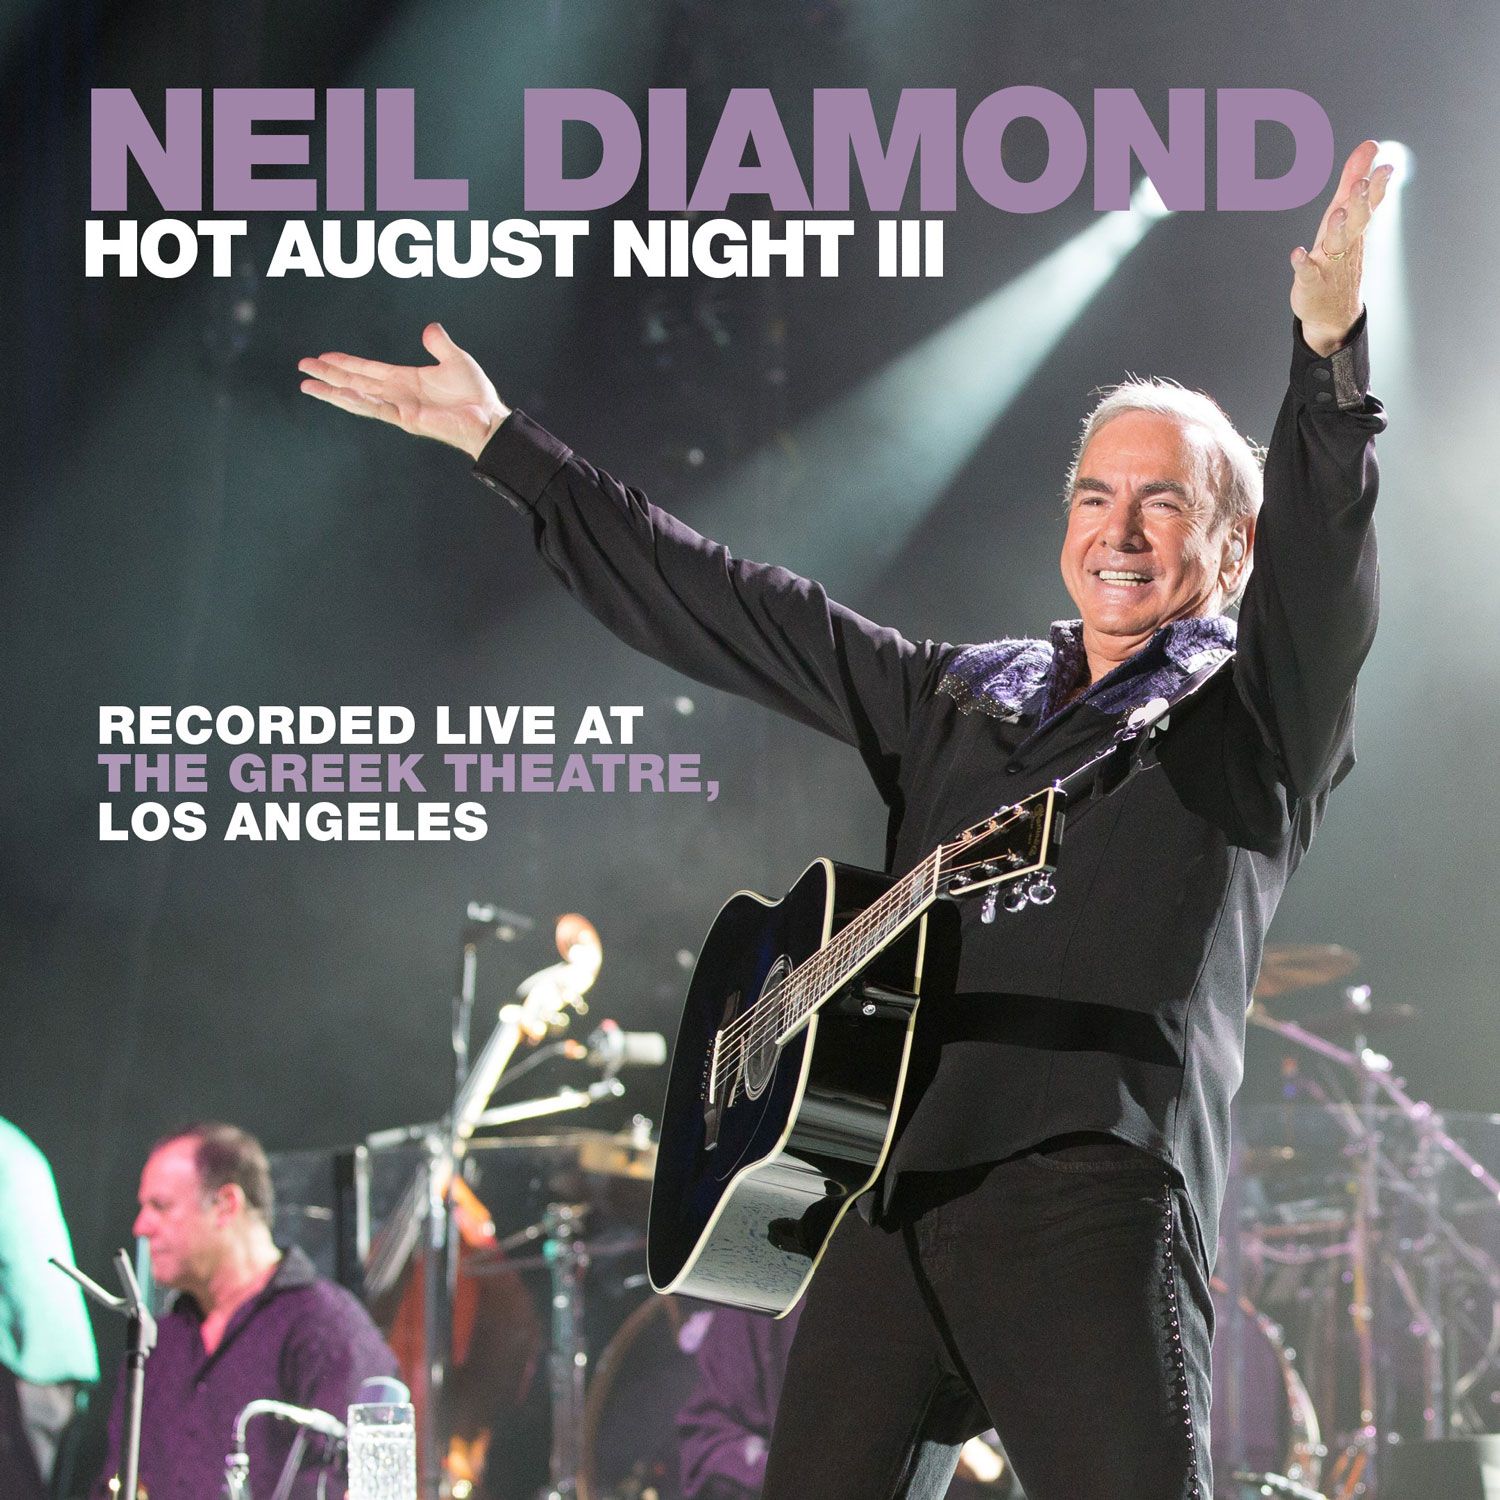 TUNE INTO ‘HOT AUGUST NIGHT III’ ON PBS!